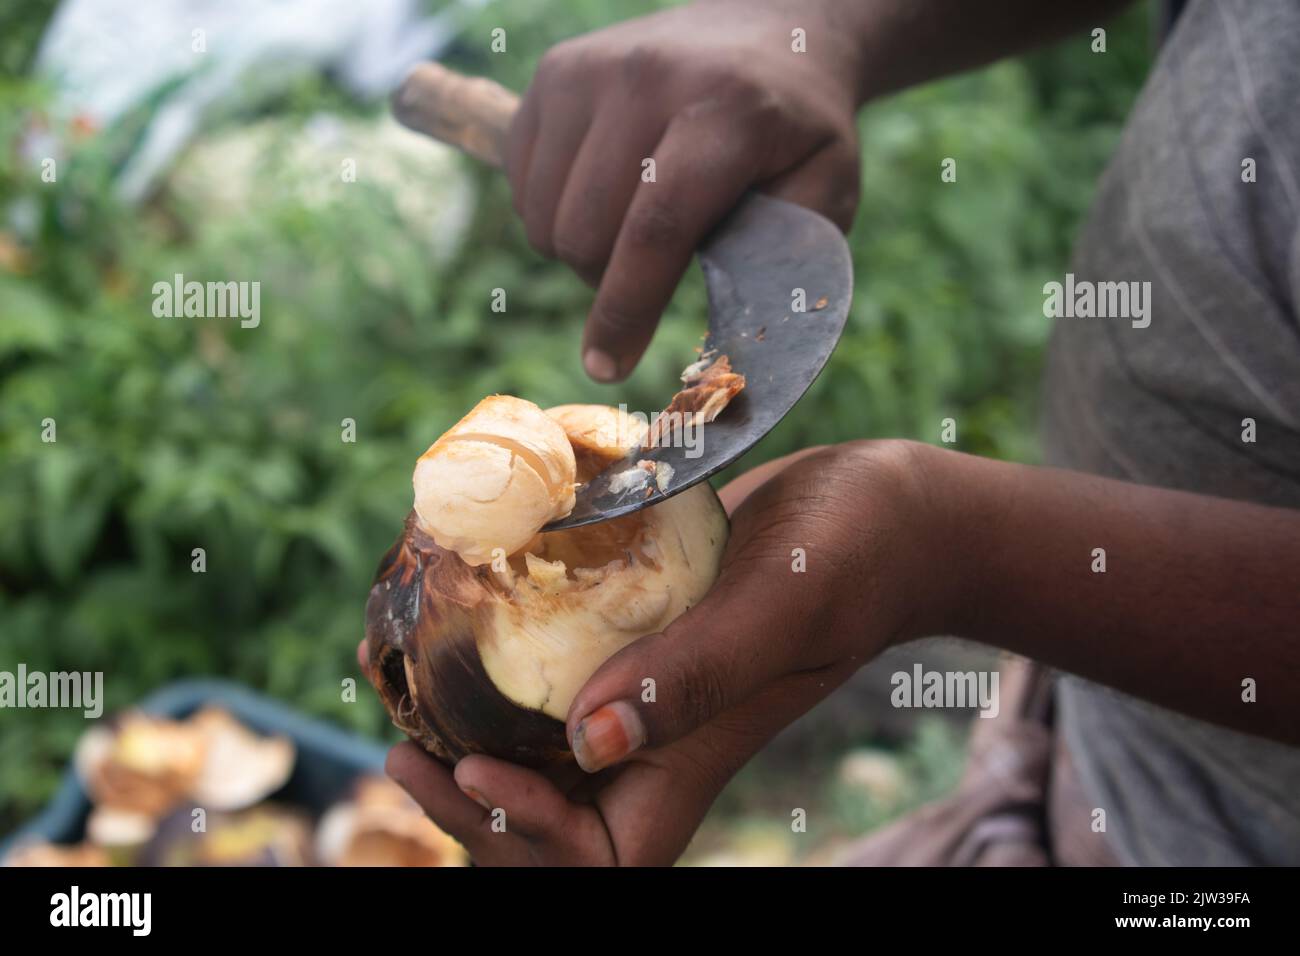 Hand Holding Cutting Or Peeling Fresh Indian Ice Apple A Palm Fruit Also Called Nungu, Pananungu Or Palmyra Fruit. A Natural Coolant, Juicy Stock Photo